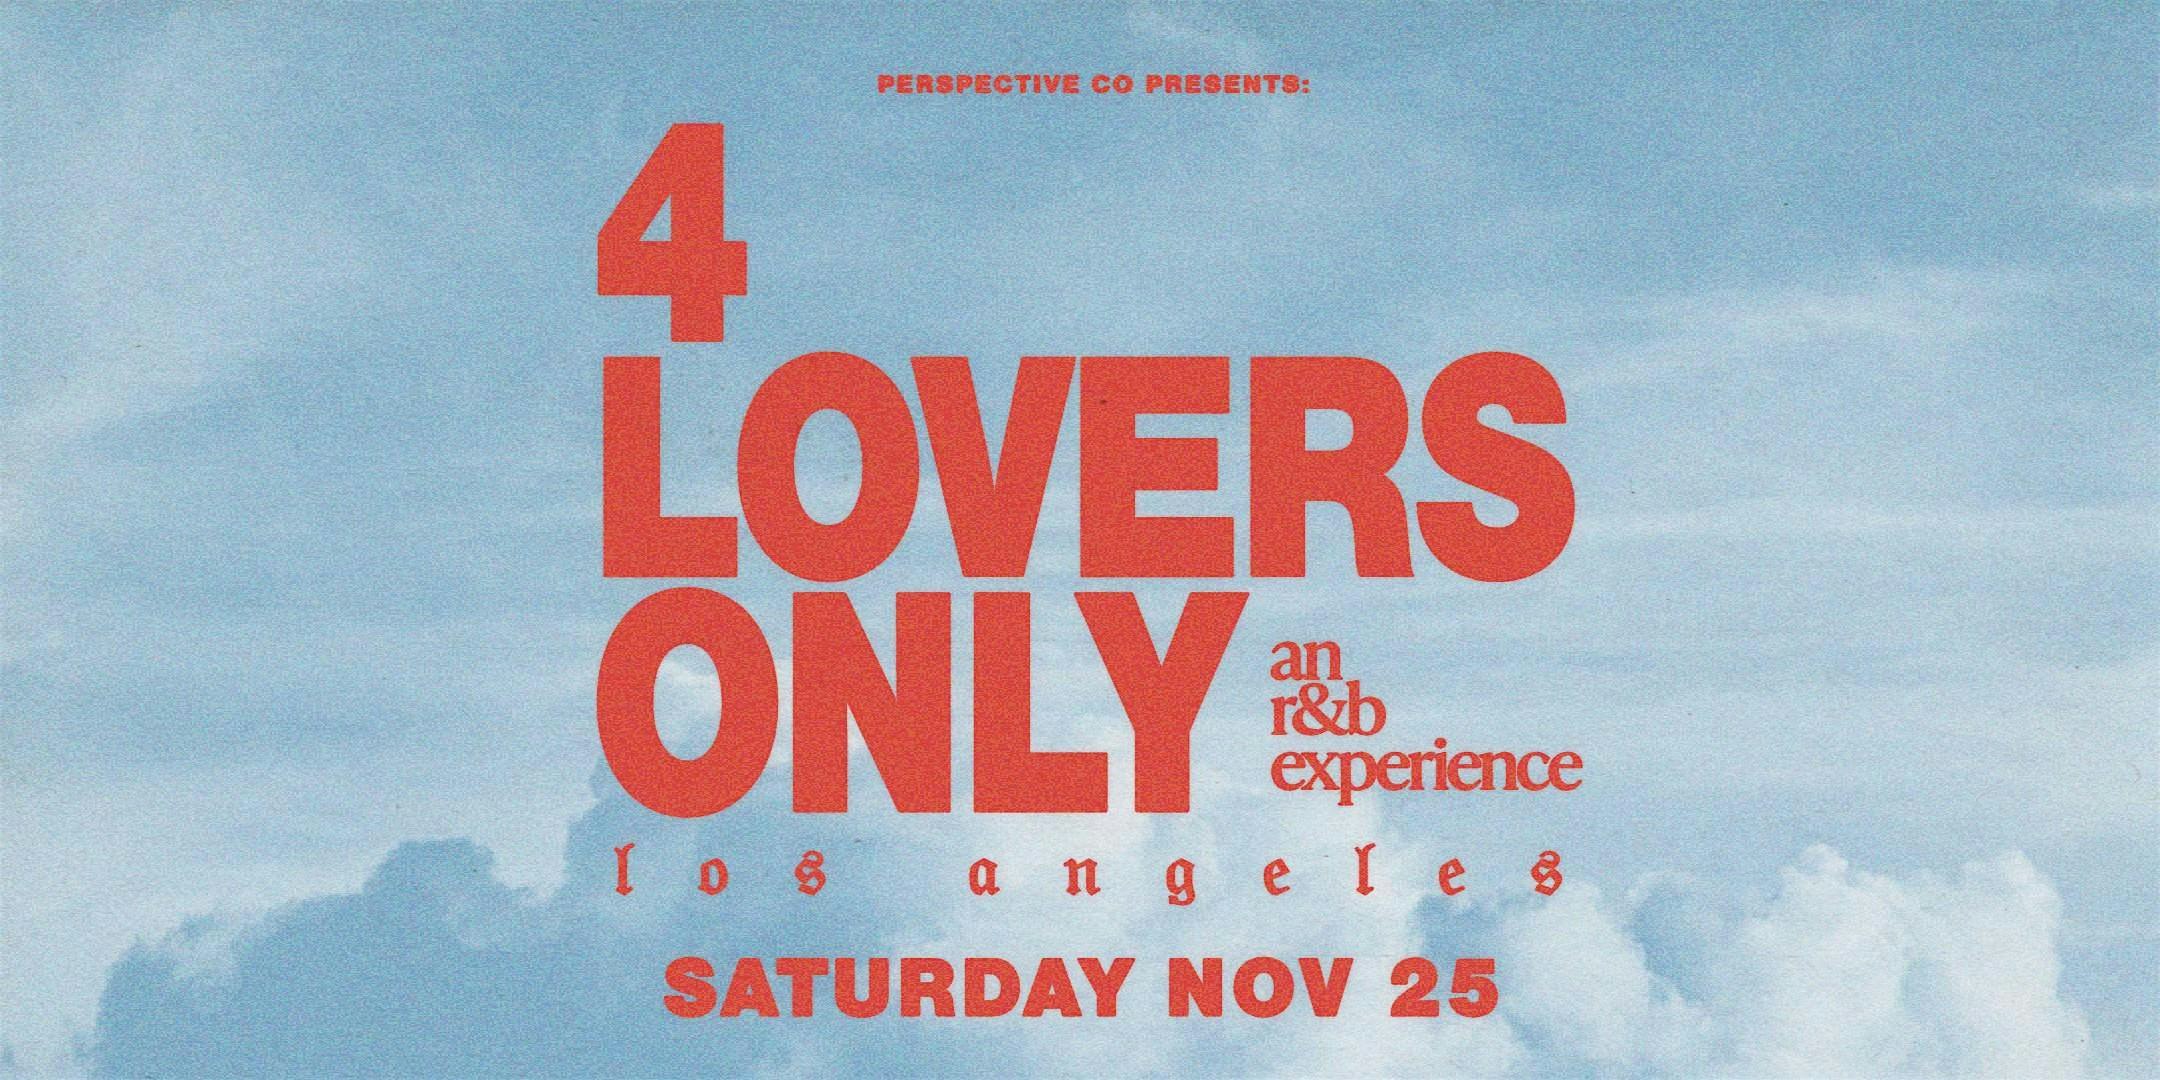 4 Lovers Only